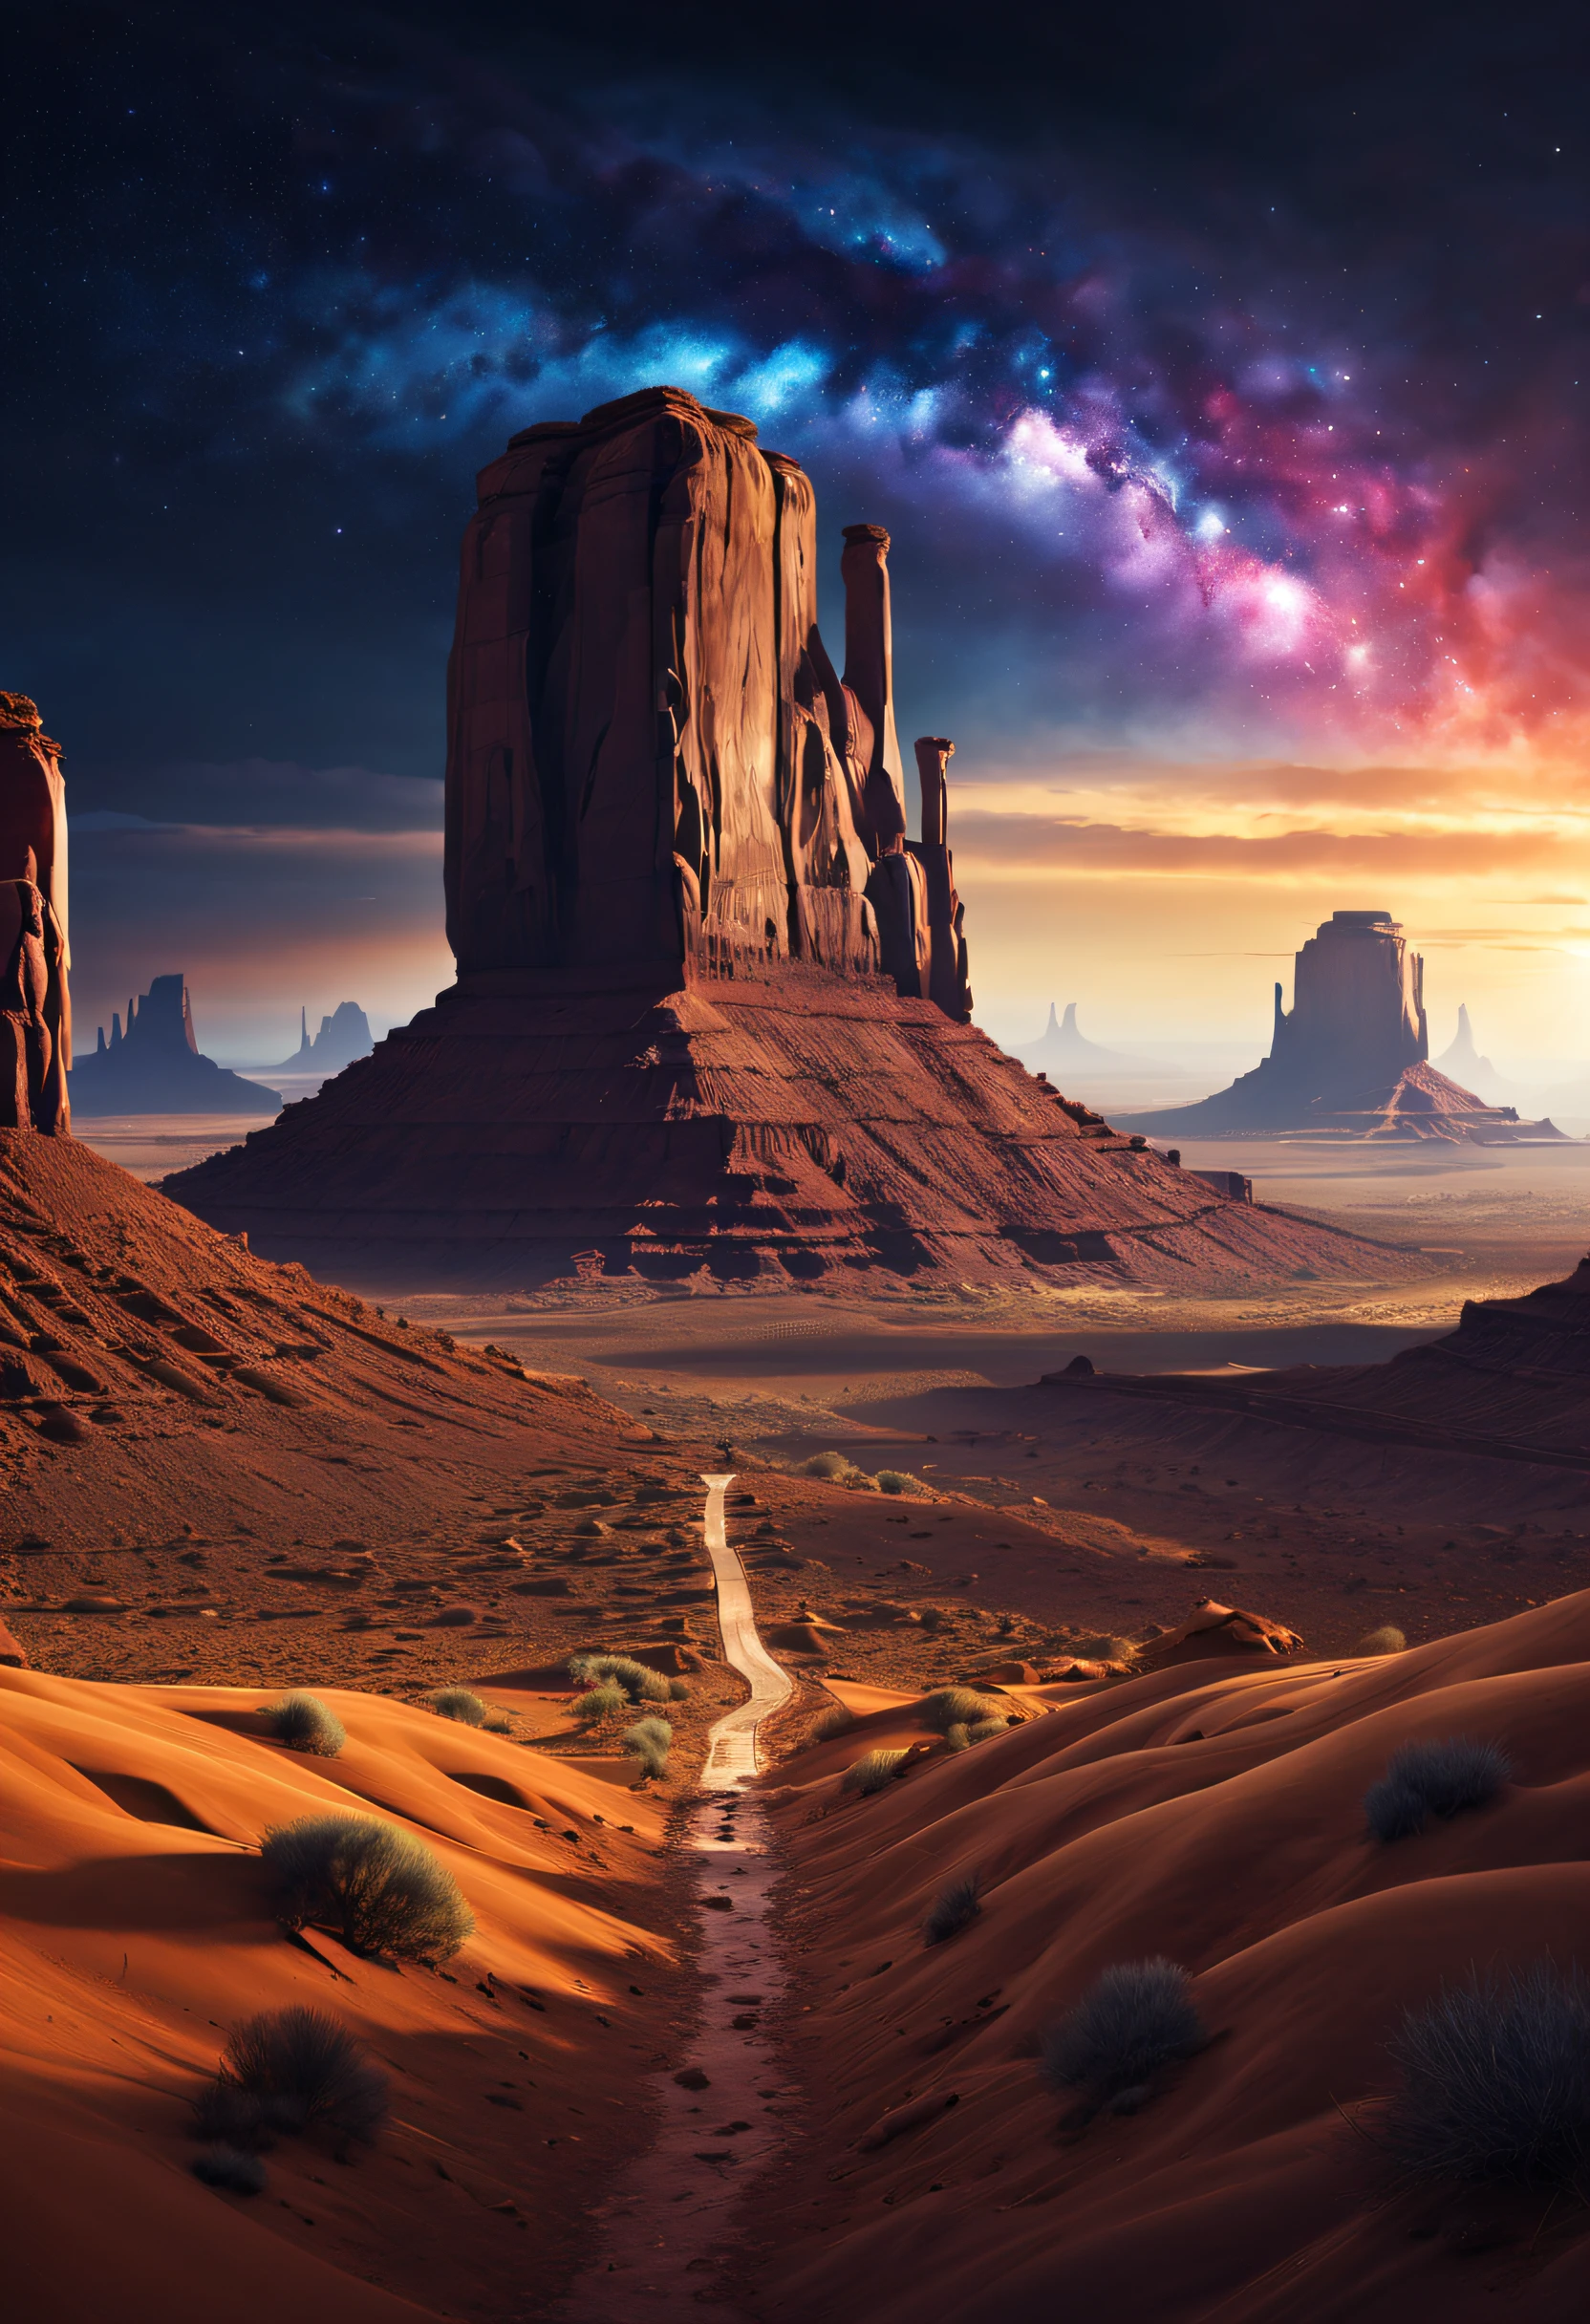 (best quality,4k,8k,highres,masterpiece:1.2),ultra-detailed,(realistic,photorealistic,photo-realistic:1.37),monument valley,illustration,dreamlike,mesmerizing colors,ethereal lighting,impressive architecture,geometric formations,exploration,serene atmosphere,ancient ruins,mystical essence,mind-bending perspective,natural wonders,gravity-defying structures,imagination unleashed,distance and vastness,hypnotic illusions,mysterious shadows,dynamic angles,geographical harmony,epic adventure,seamless blend of reality and fantasy,otherworldly journey,harmony of light and shadow,limitless possibilities,surreal landscapes,puzzle-like structures,asymmetric forms,journey through time and space,awe-inspiring vistas,colorful symbolism,fascinating dream world,architectural marvels,innovative design,harmonious coexistence of nature and man-made,unforgettable experiences